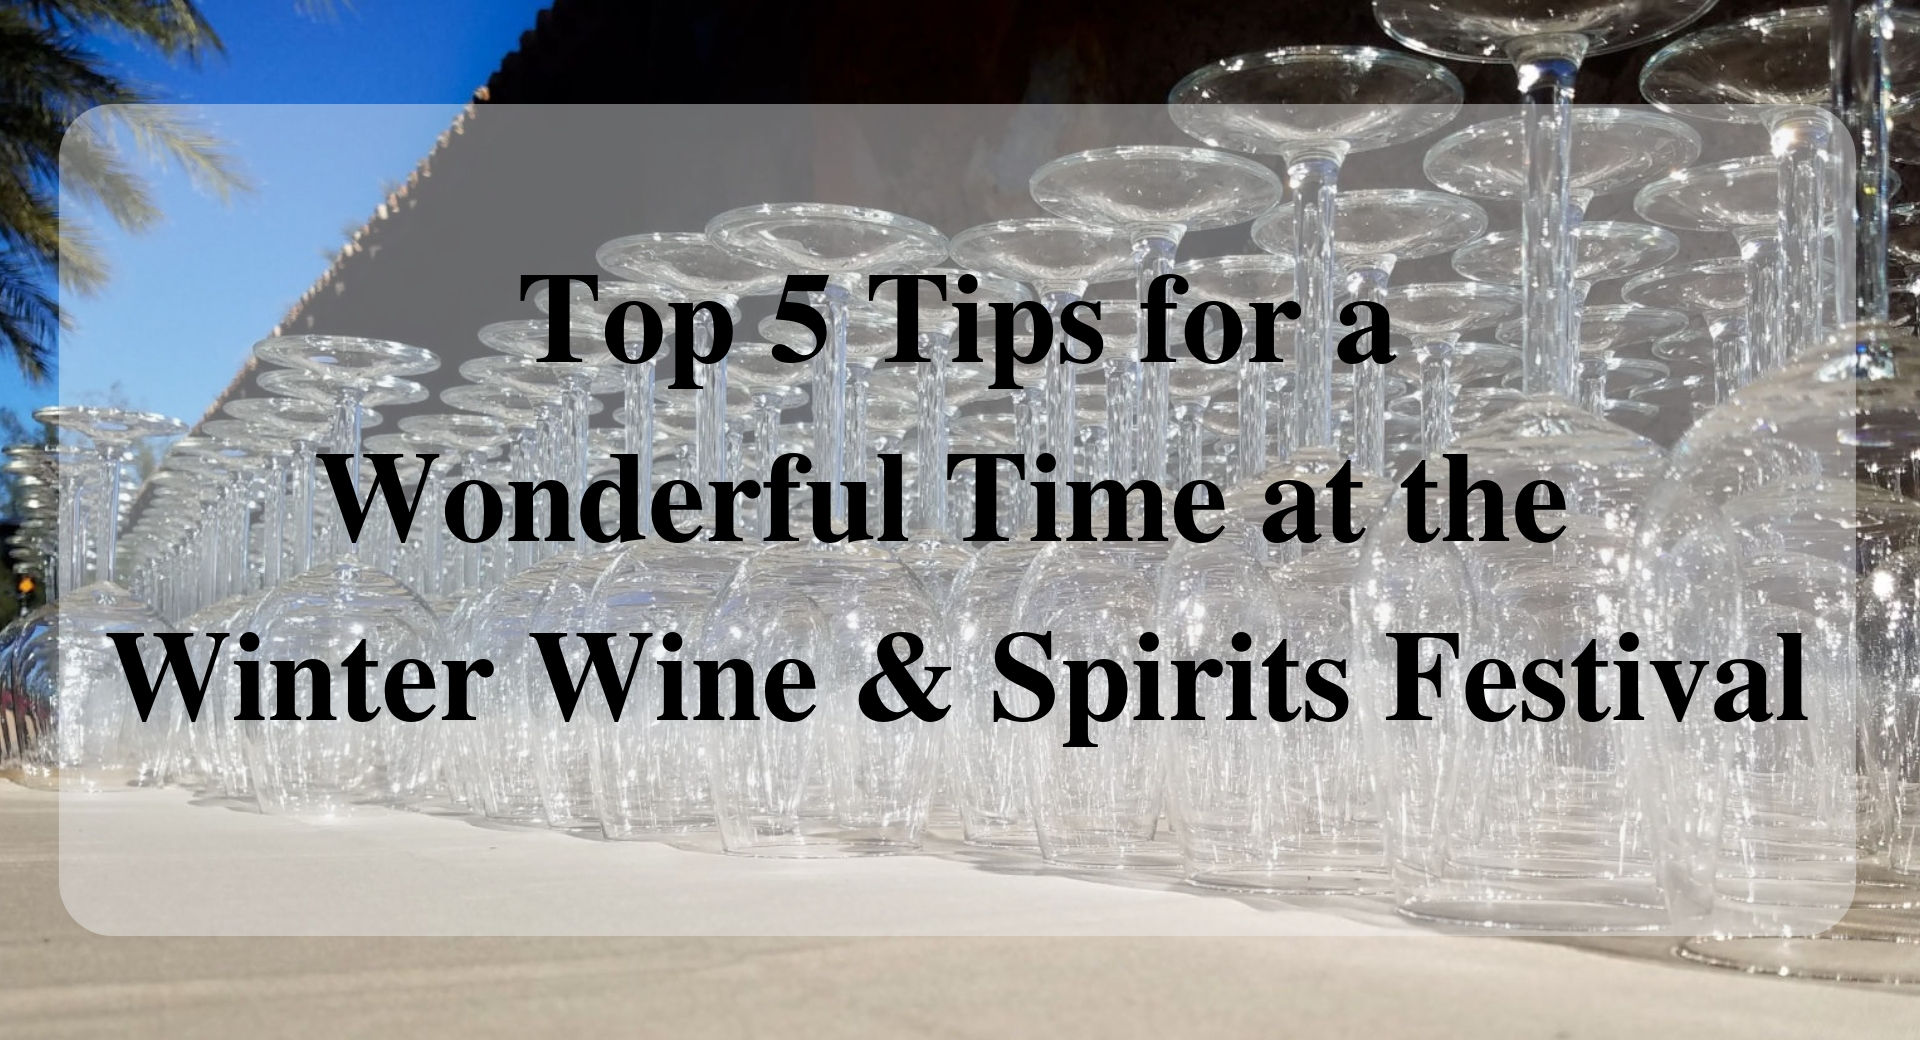 Top 5 Tips for a Wonderful Time at the Winter Wine & Spirits Festival